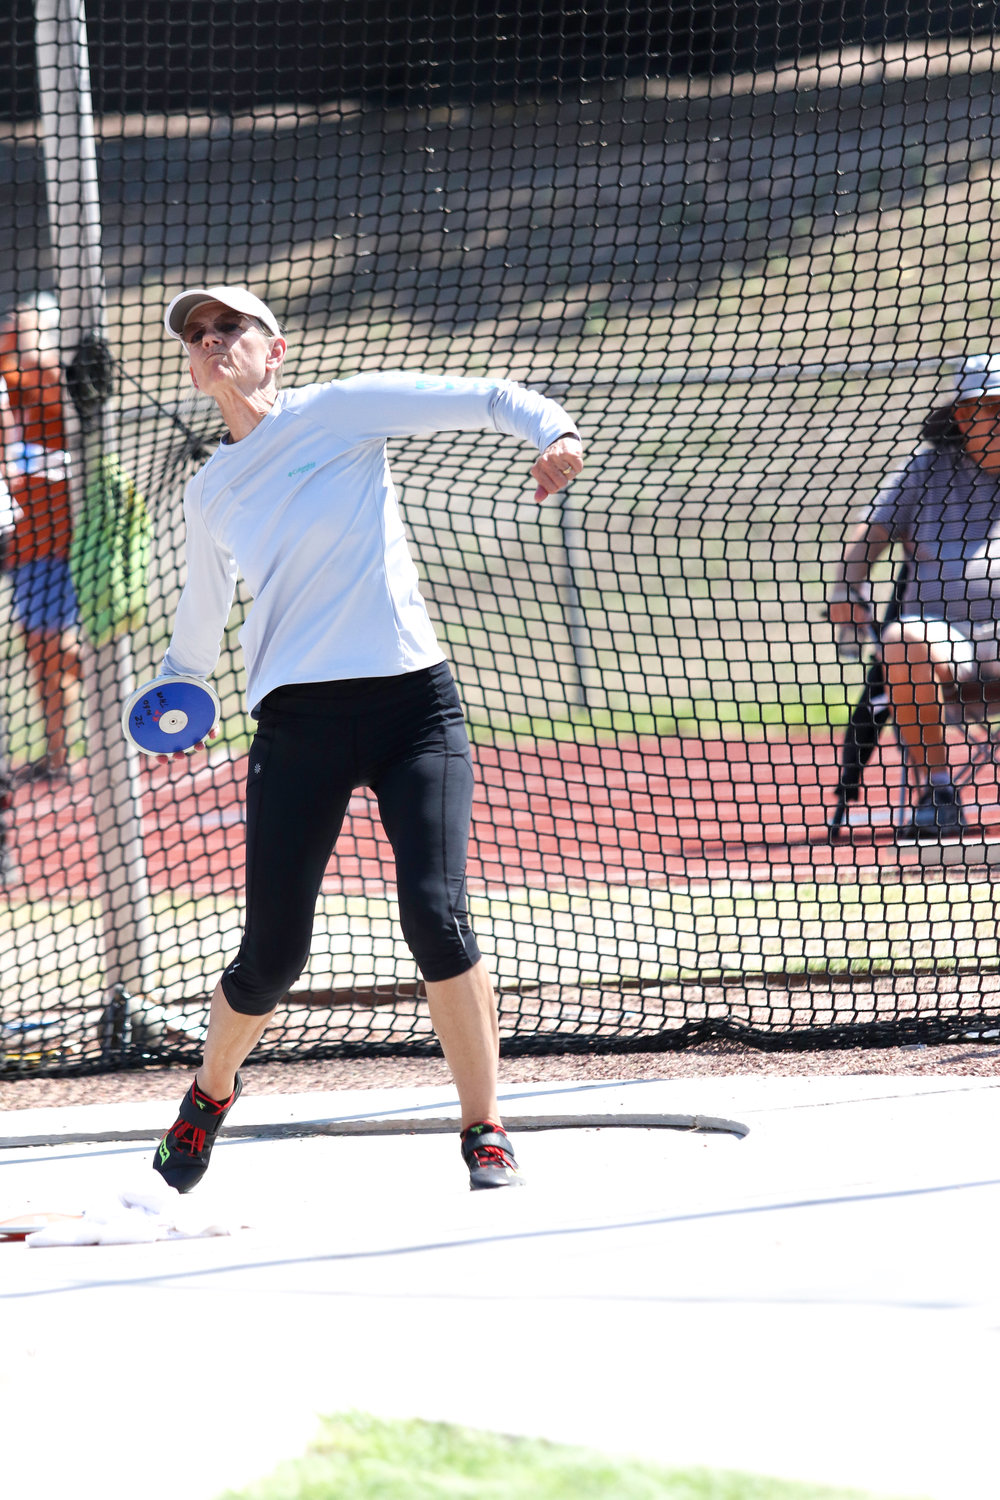 Kristen Terpening of Tucson took first place in discus in the 60-62 age group.